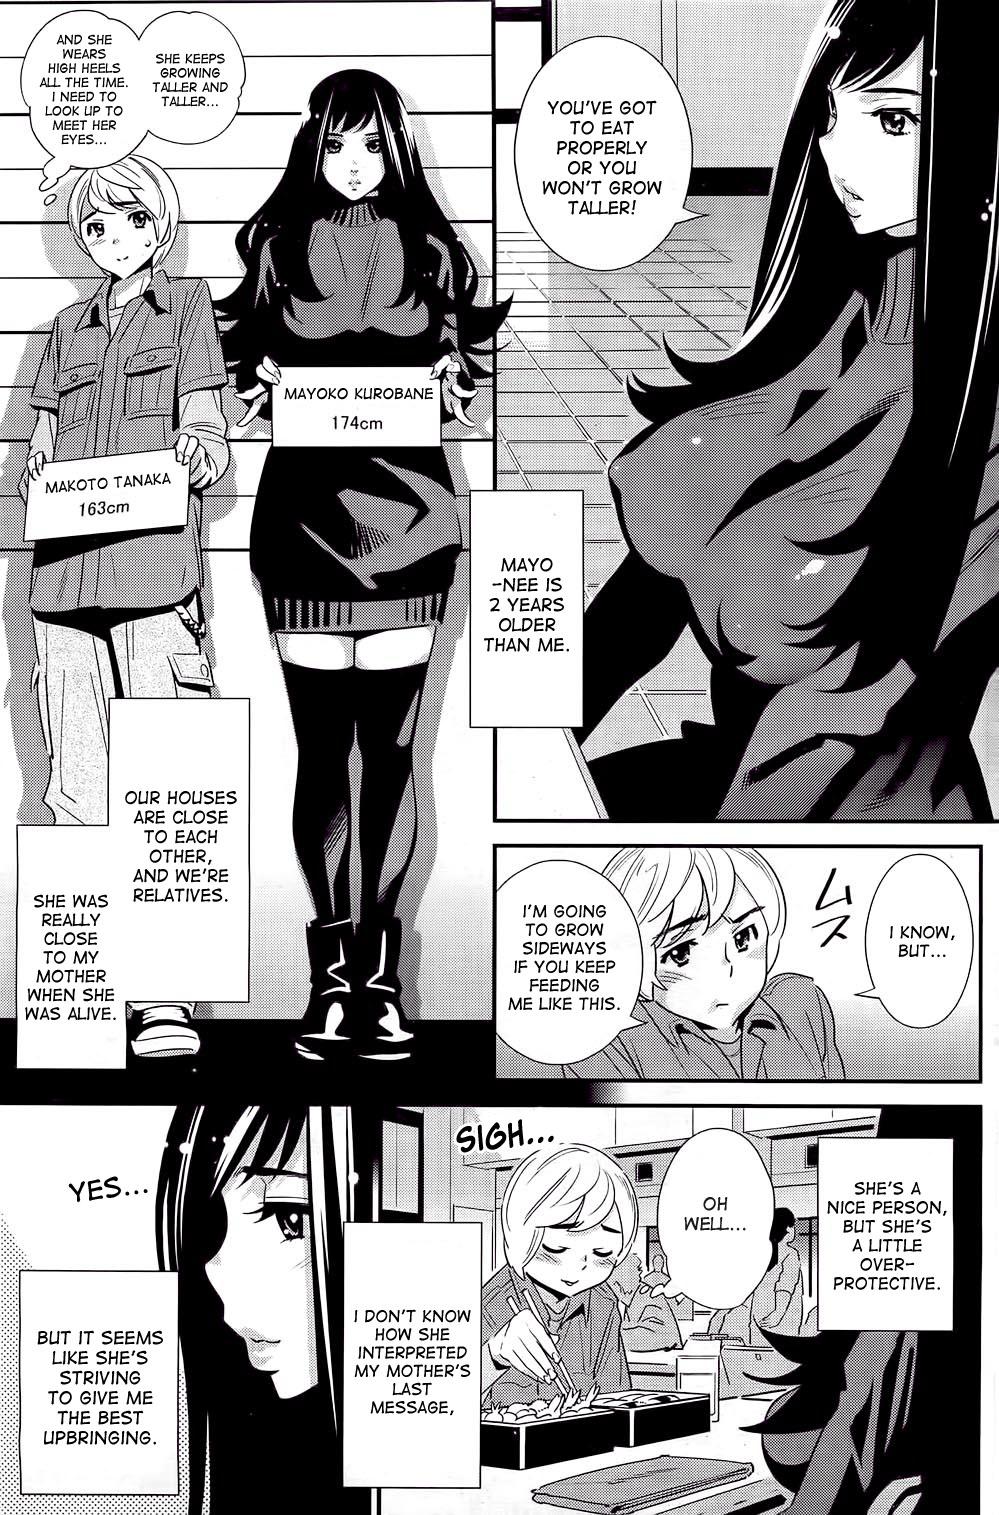 New Boku no Haigorei? | The Ghost Behind My Back? Jacking - Page 3